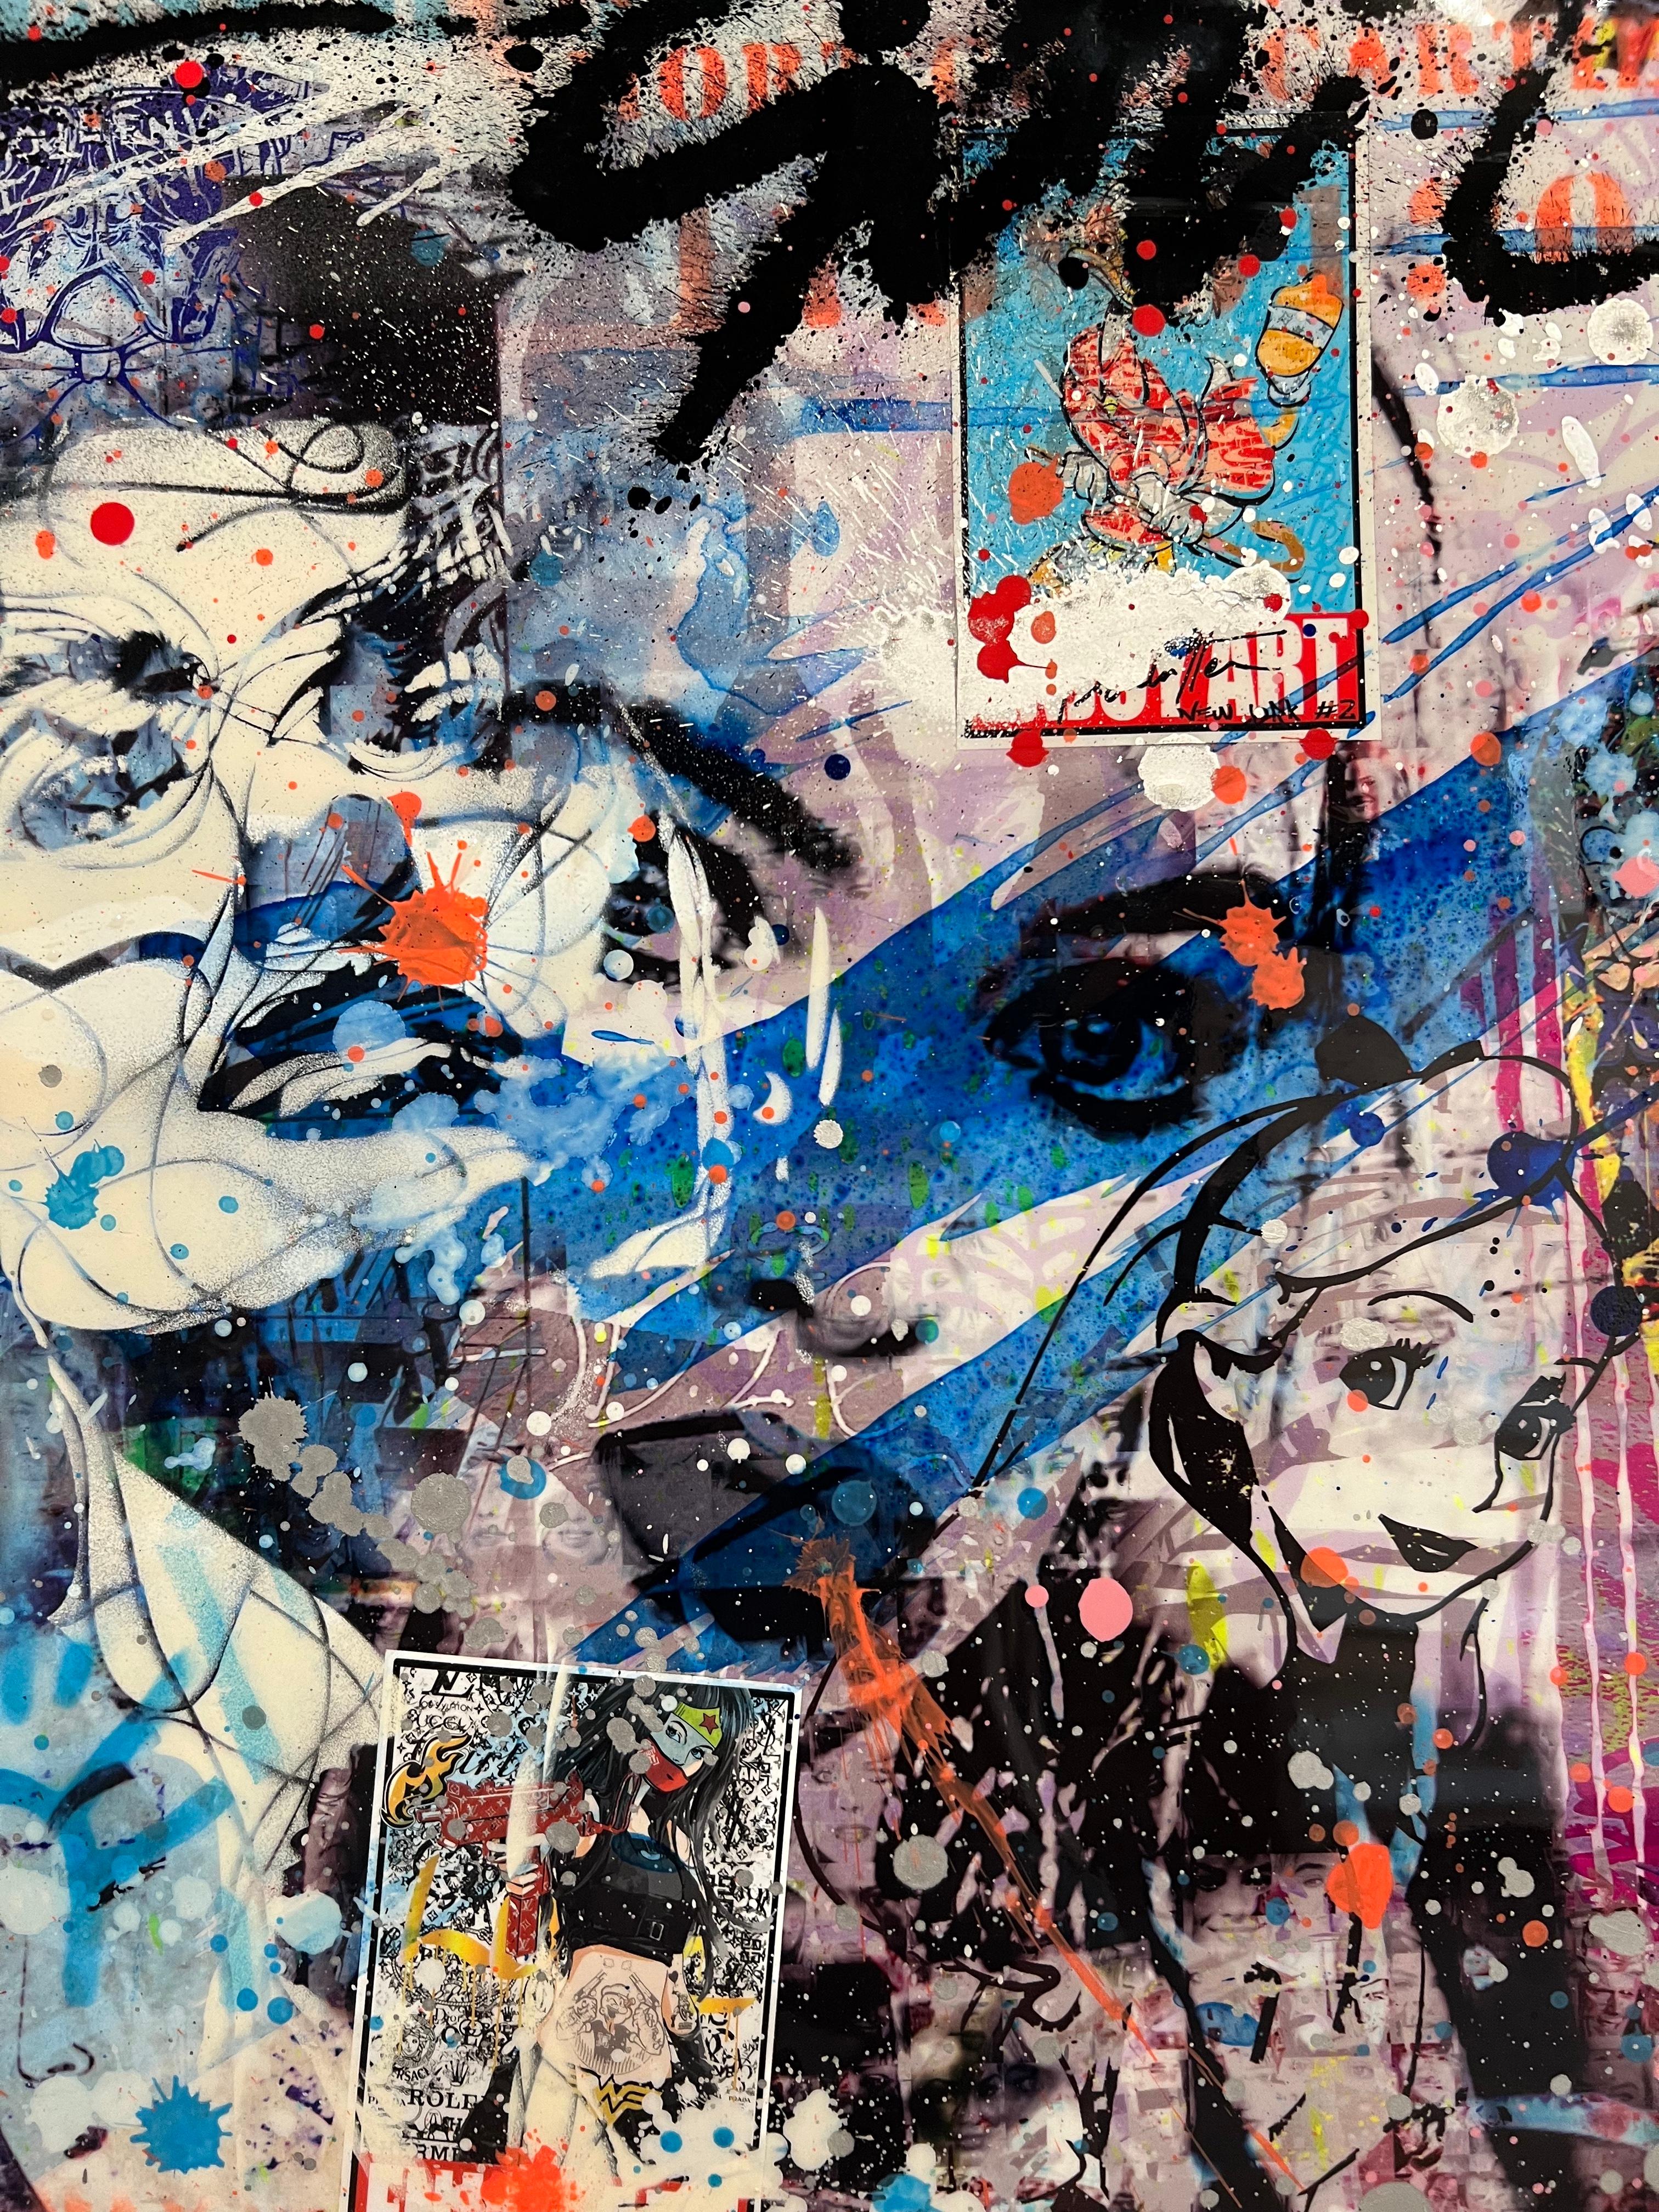 Framed Mixed media on aluminum.
Cédric Bouteiller is a French multidisciplinary urban artist known for his complex and layered mixed-media works. Born in 1970, he studied Fine Arts and Philosophy in Marseilles, Aix-en-Provence. Bouteiller is a